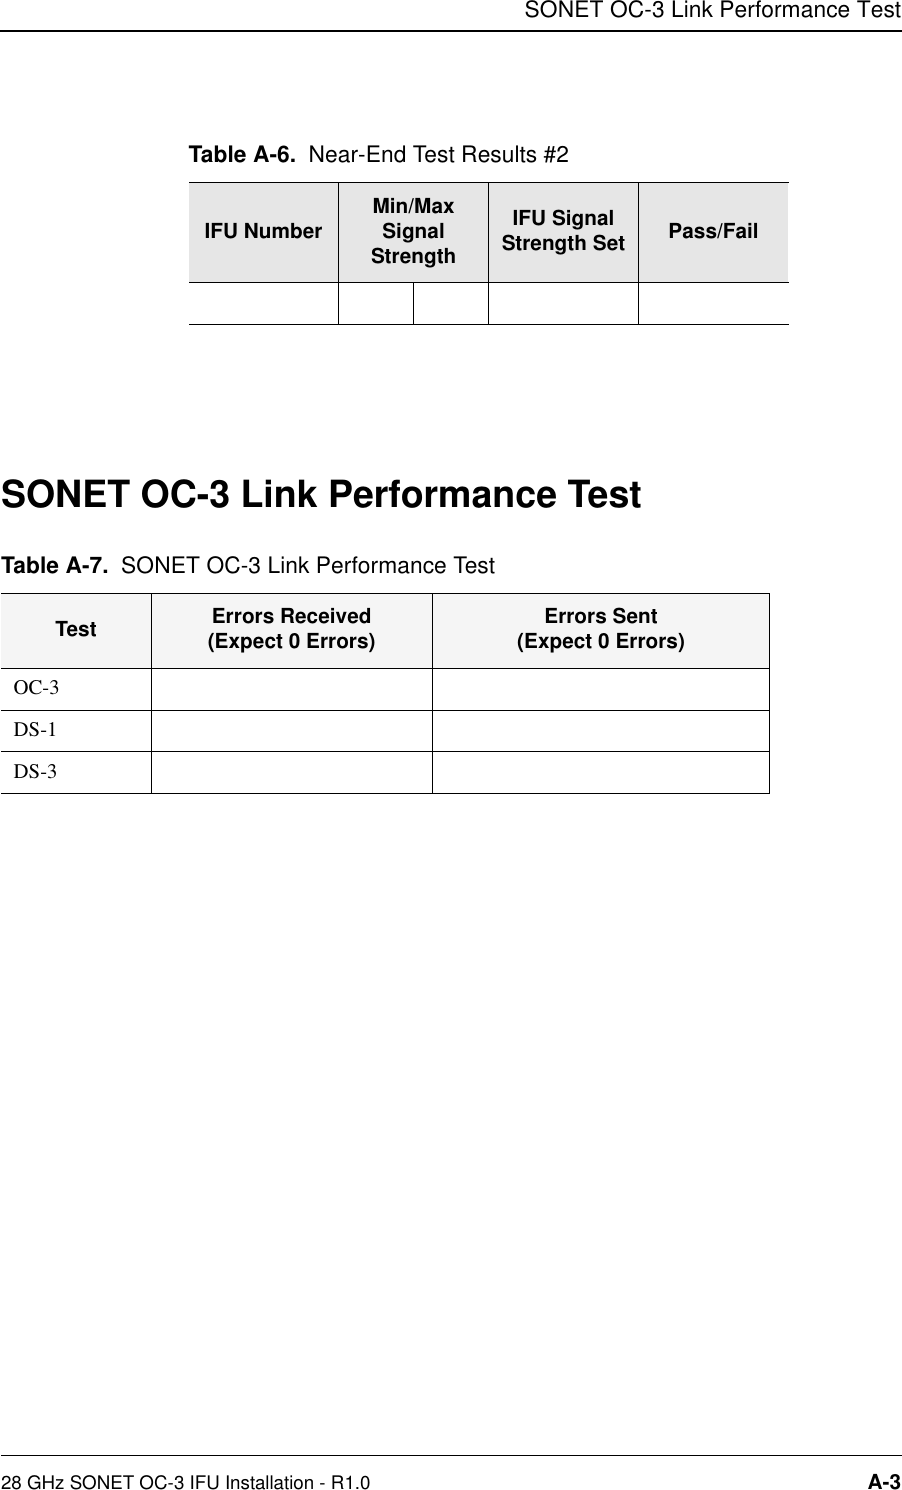 SONET OC-3 Link Performance Test28 GHz SONET OC-3 IFU Installation - R1.0 A-3 SONET OC-3 Link Performance Test Table A-6. Near-End Test Results #2IFU Number Min/MaxSignal StrengthIFU Signal Strength Set Pass/FailTable A-7. SONET OC-3 Link Performance TestTest Errors Received(Expect 0 Errors) Errors Sent(Expect 0 Errors)OC-3DS-1DS-3